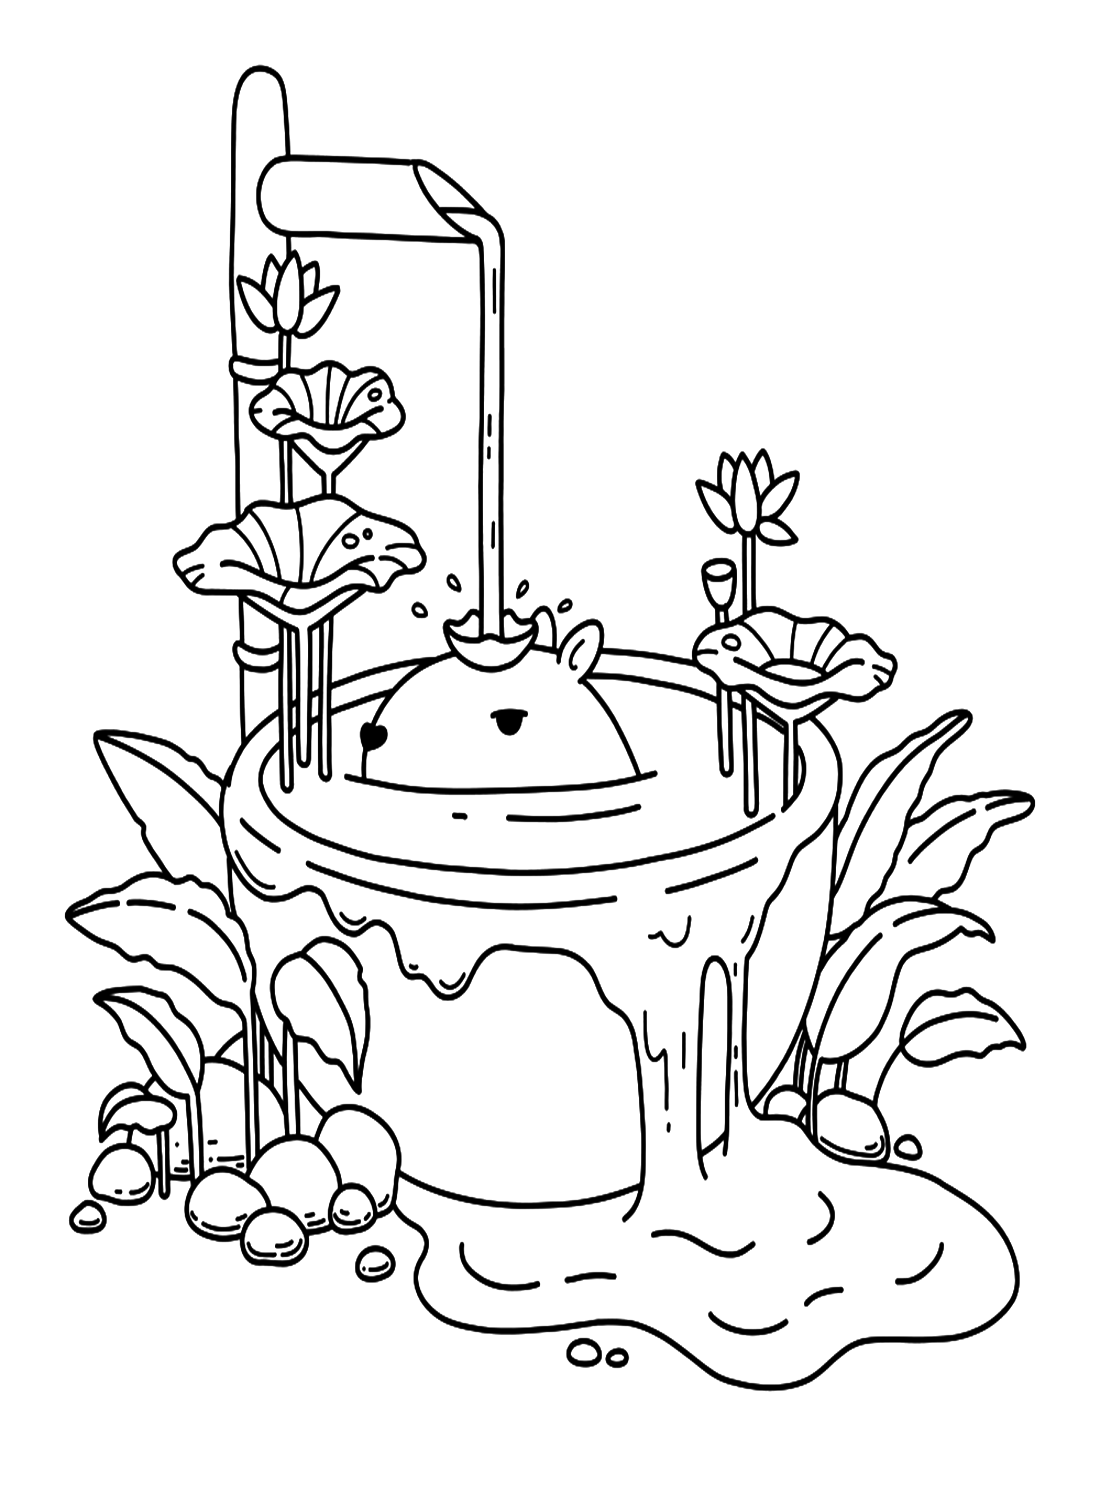 Capybara Bathing In The Pool Coloring Pages